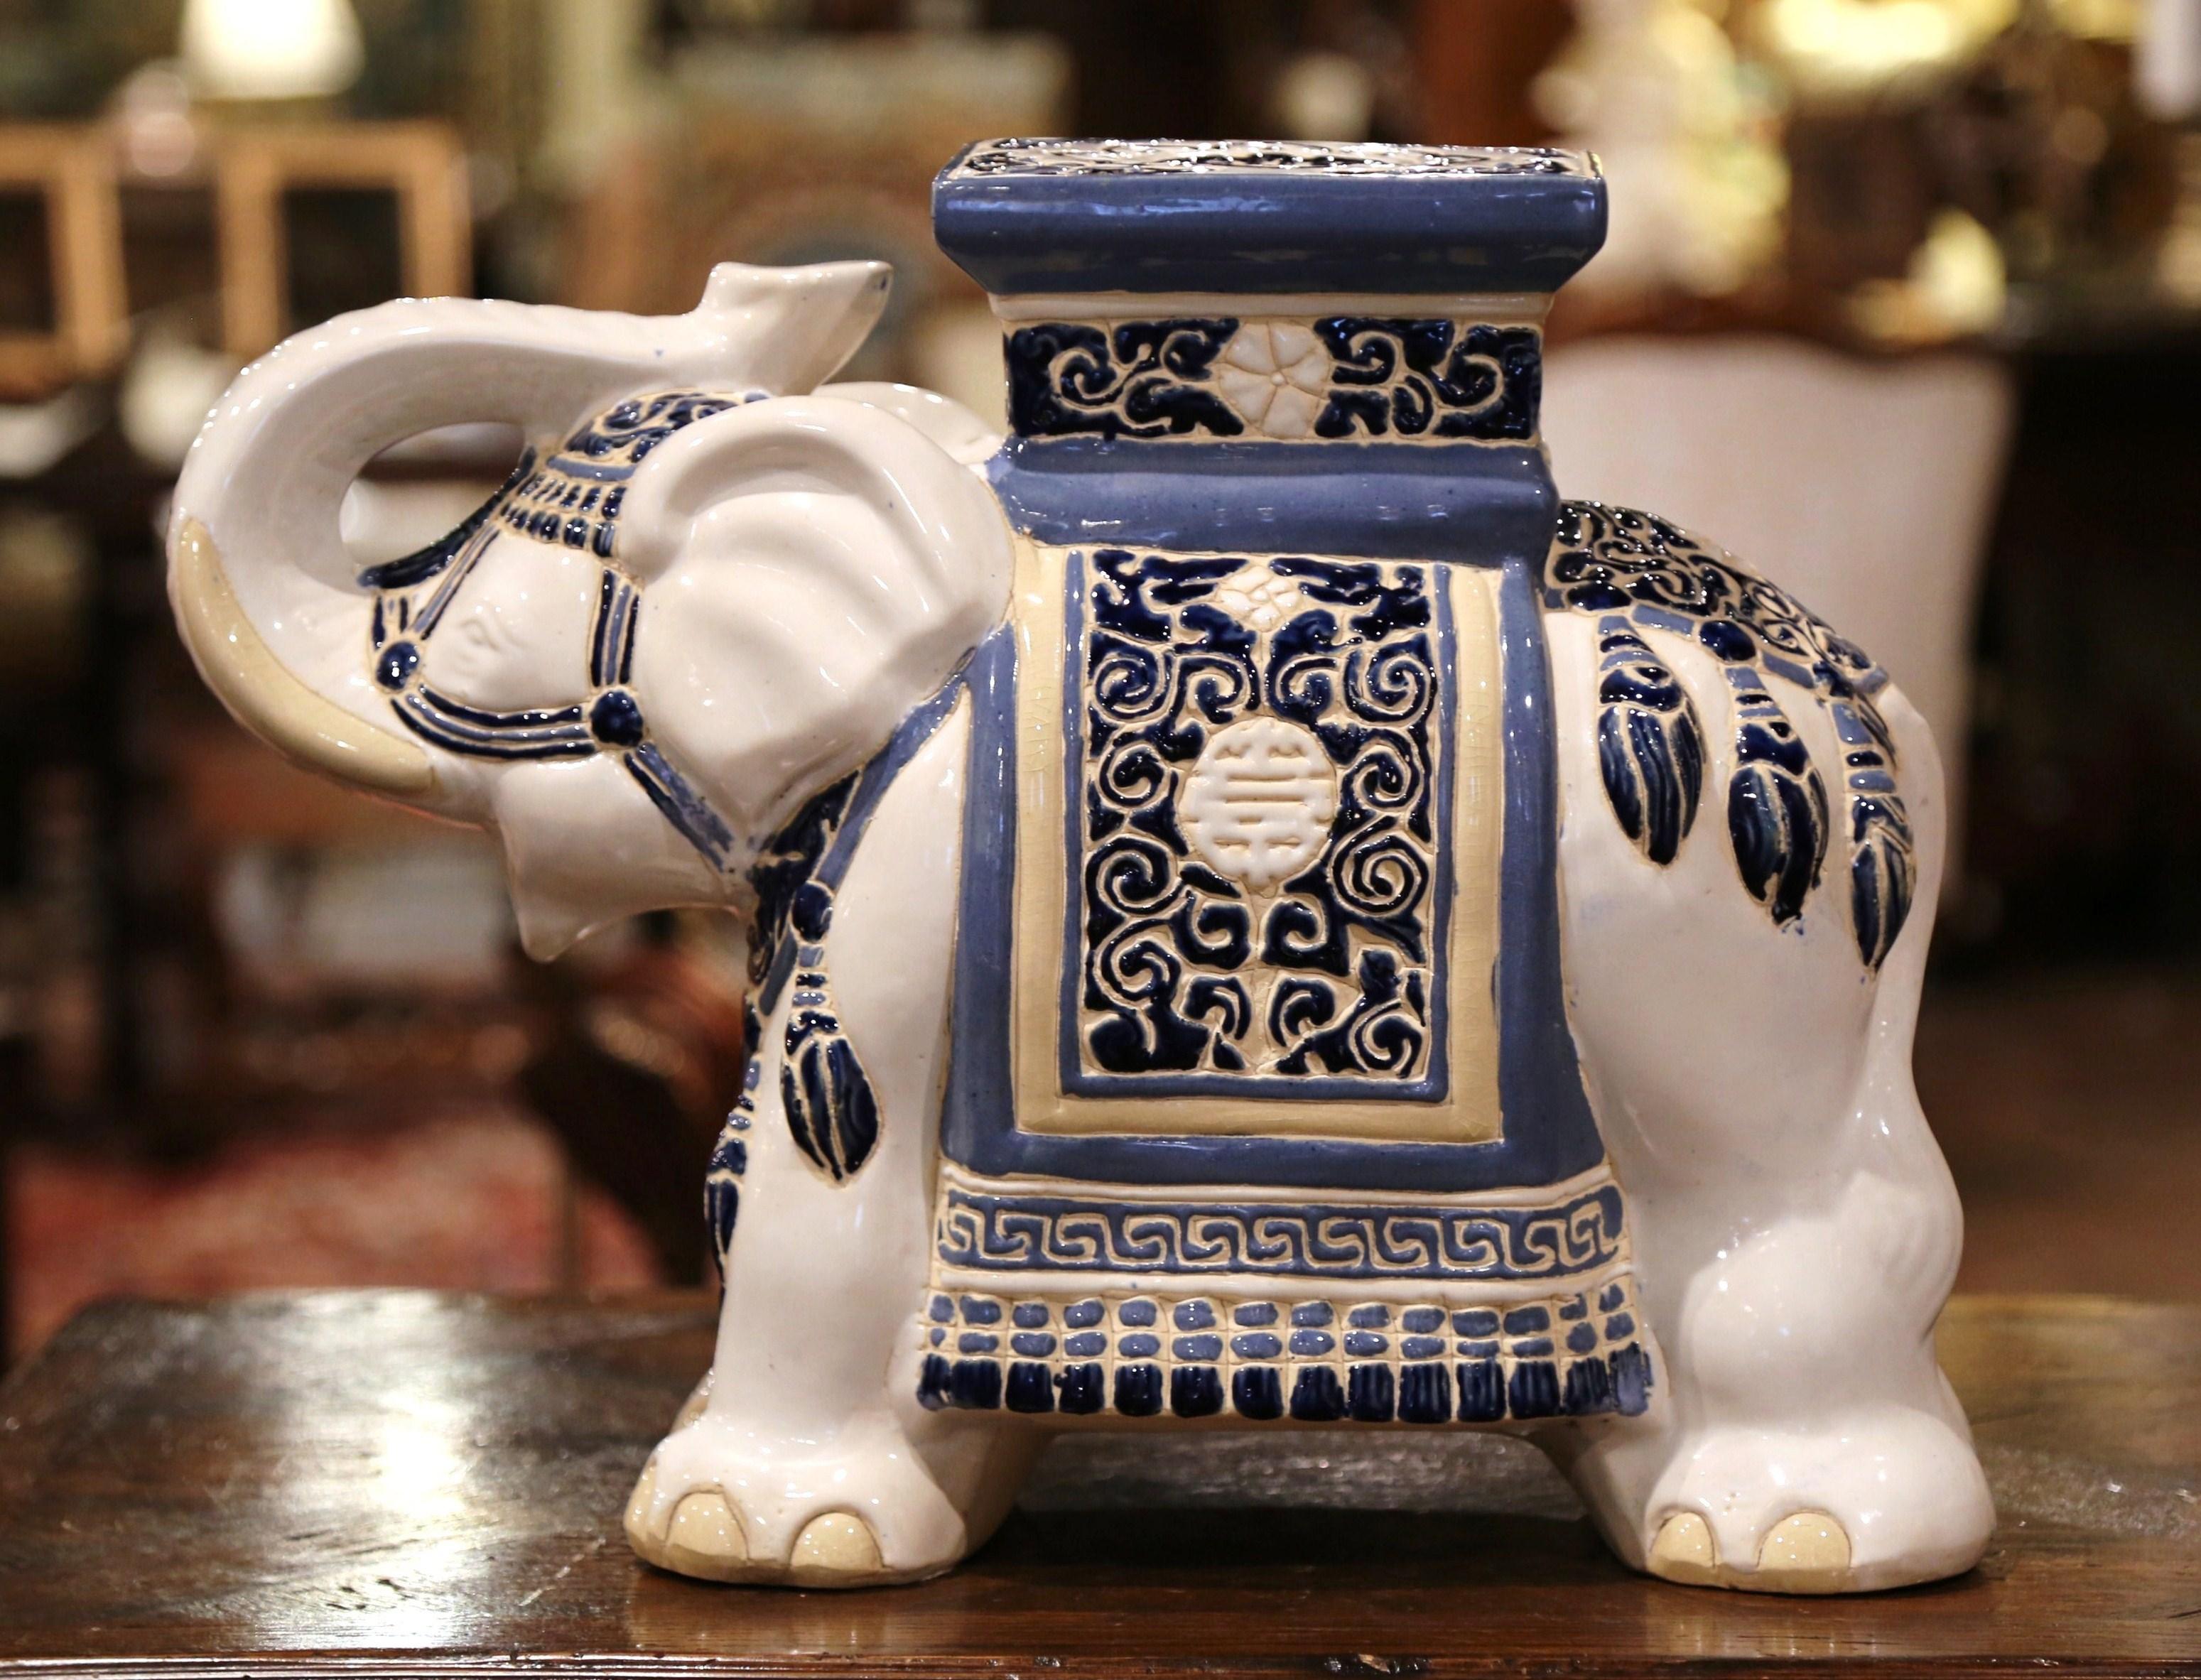 This interesting, vintage porcelain garden seat was found in France. Crafted circa 1960, the ceramic seating shaped as an elephant with his trunk raised (good luck sign in Asia), is heavily decorated in oriental finery, the colorful mammal has a